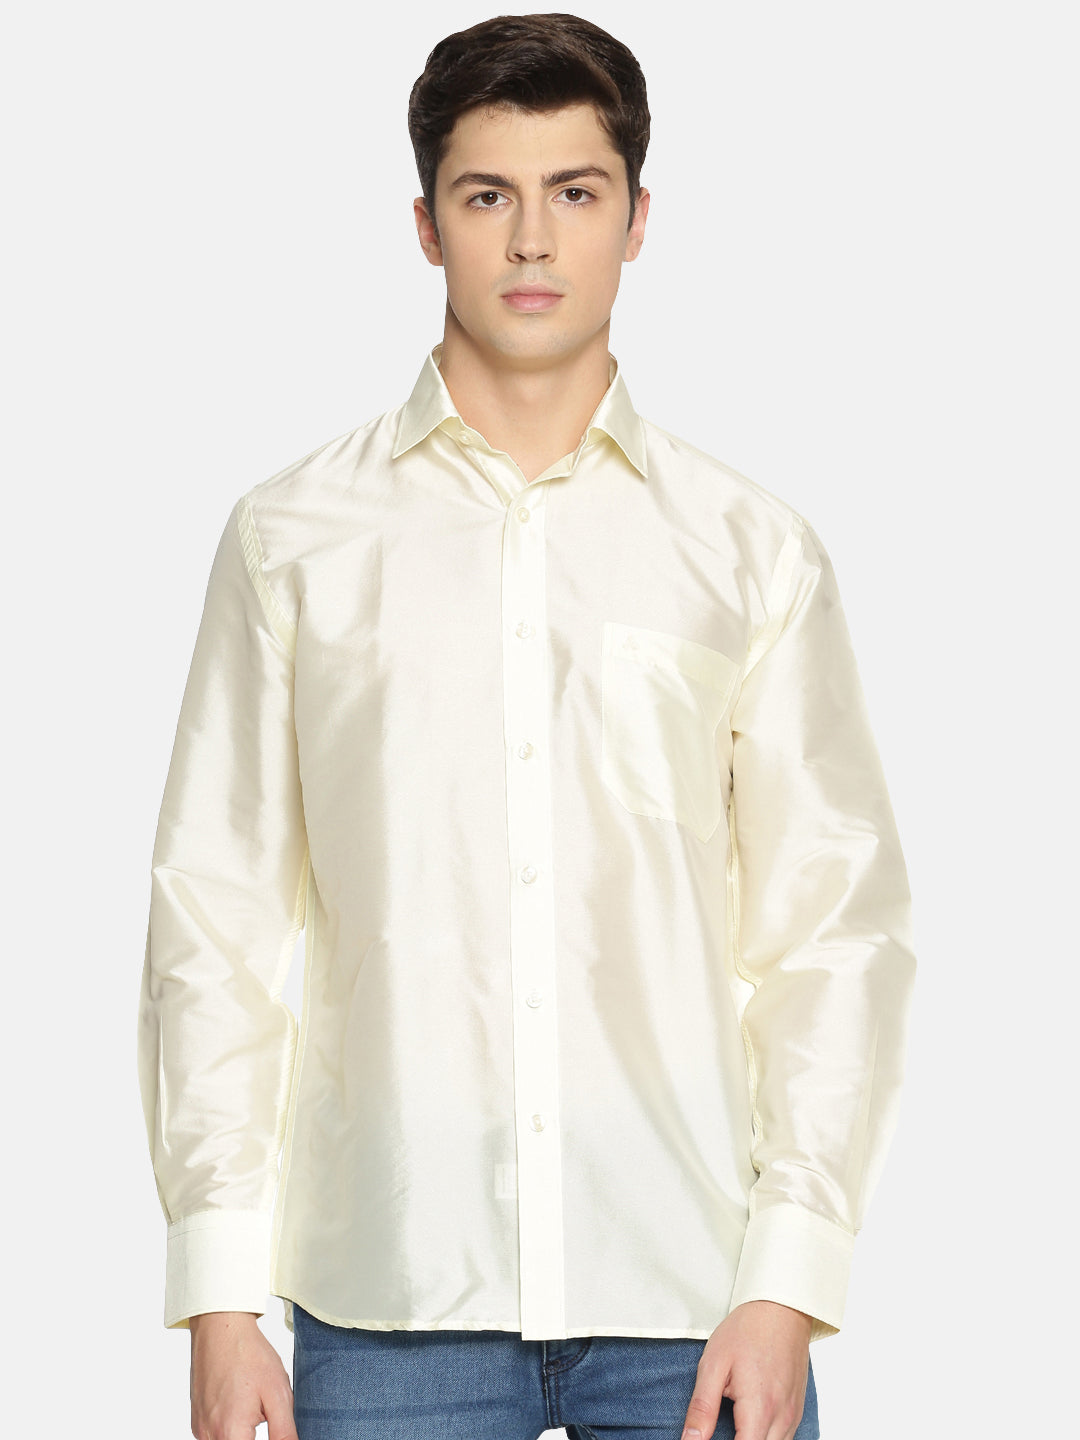 Buy Cream-Colored Polyester Slim Fit Solid Party Shirt - Tattva.Life